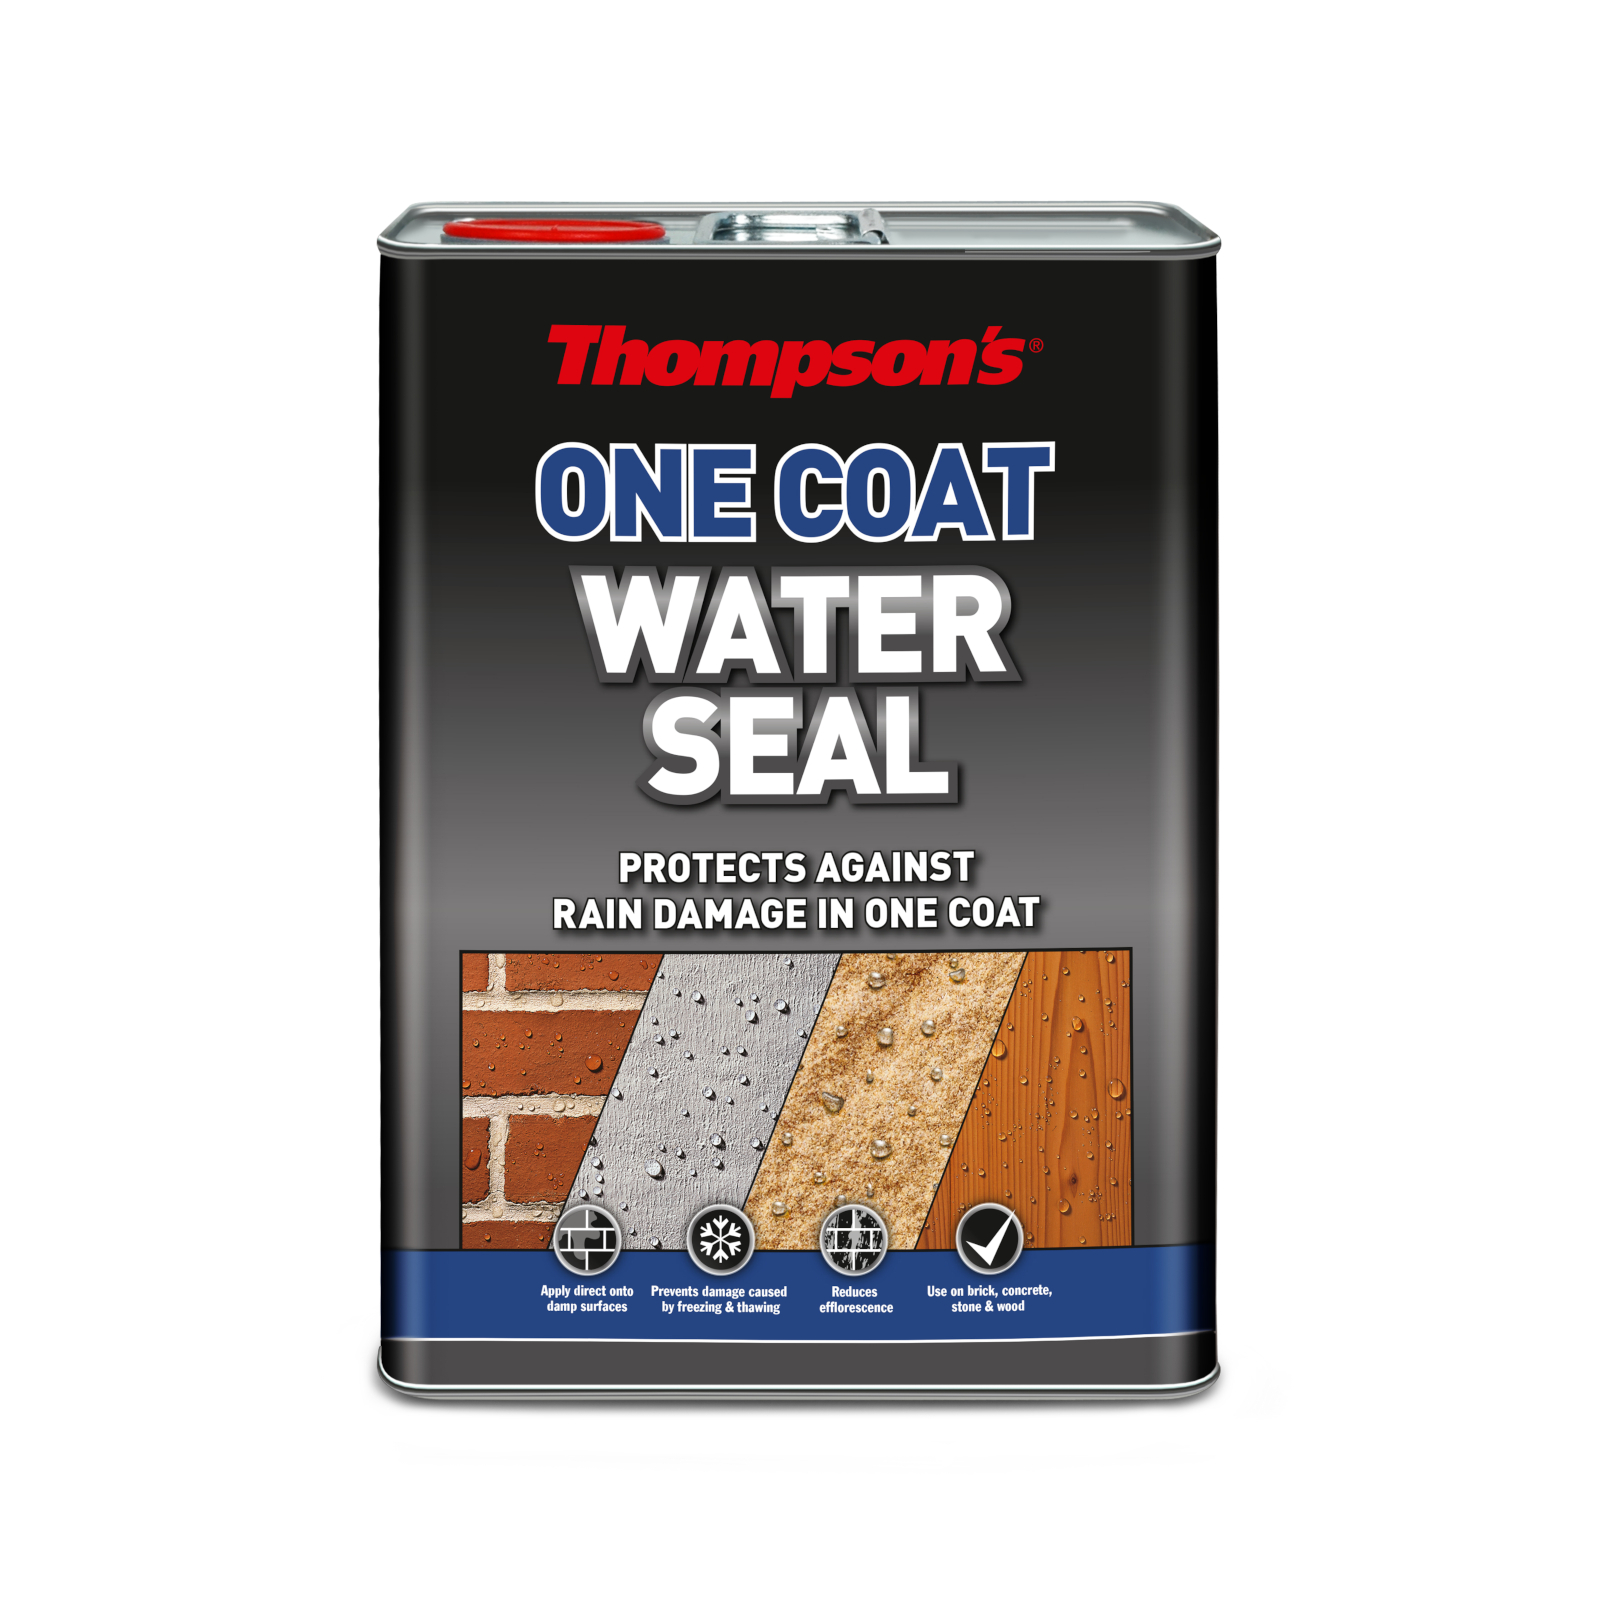 THOMPSONS ONE COAT WATERSEAL 5L